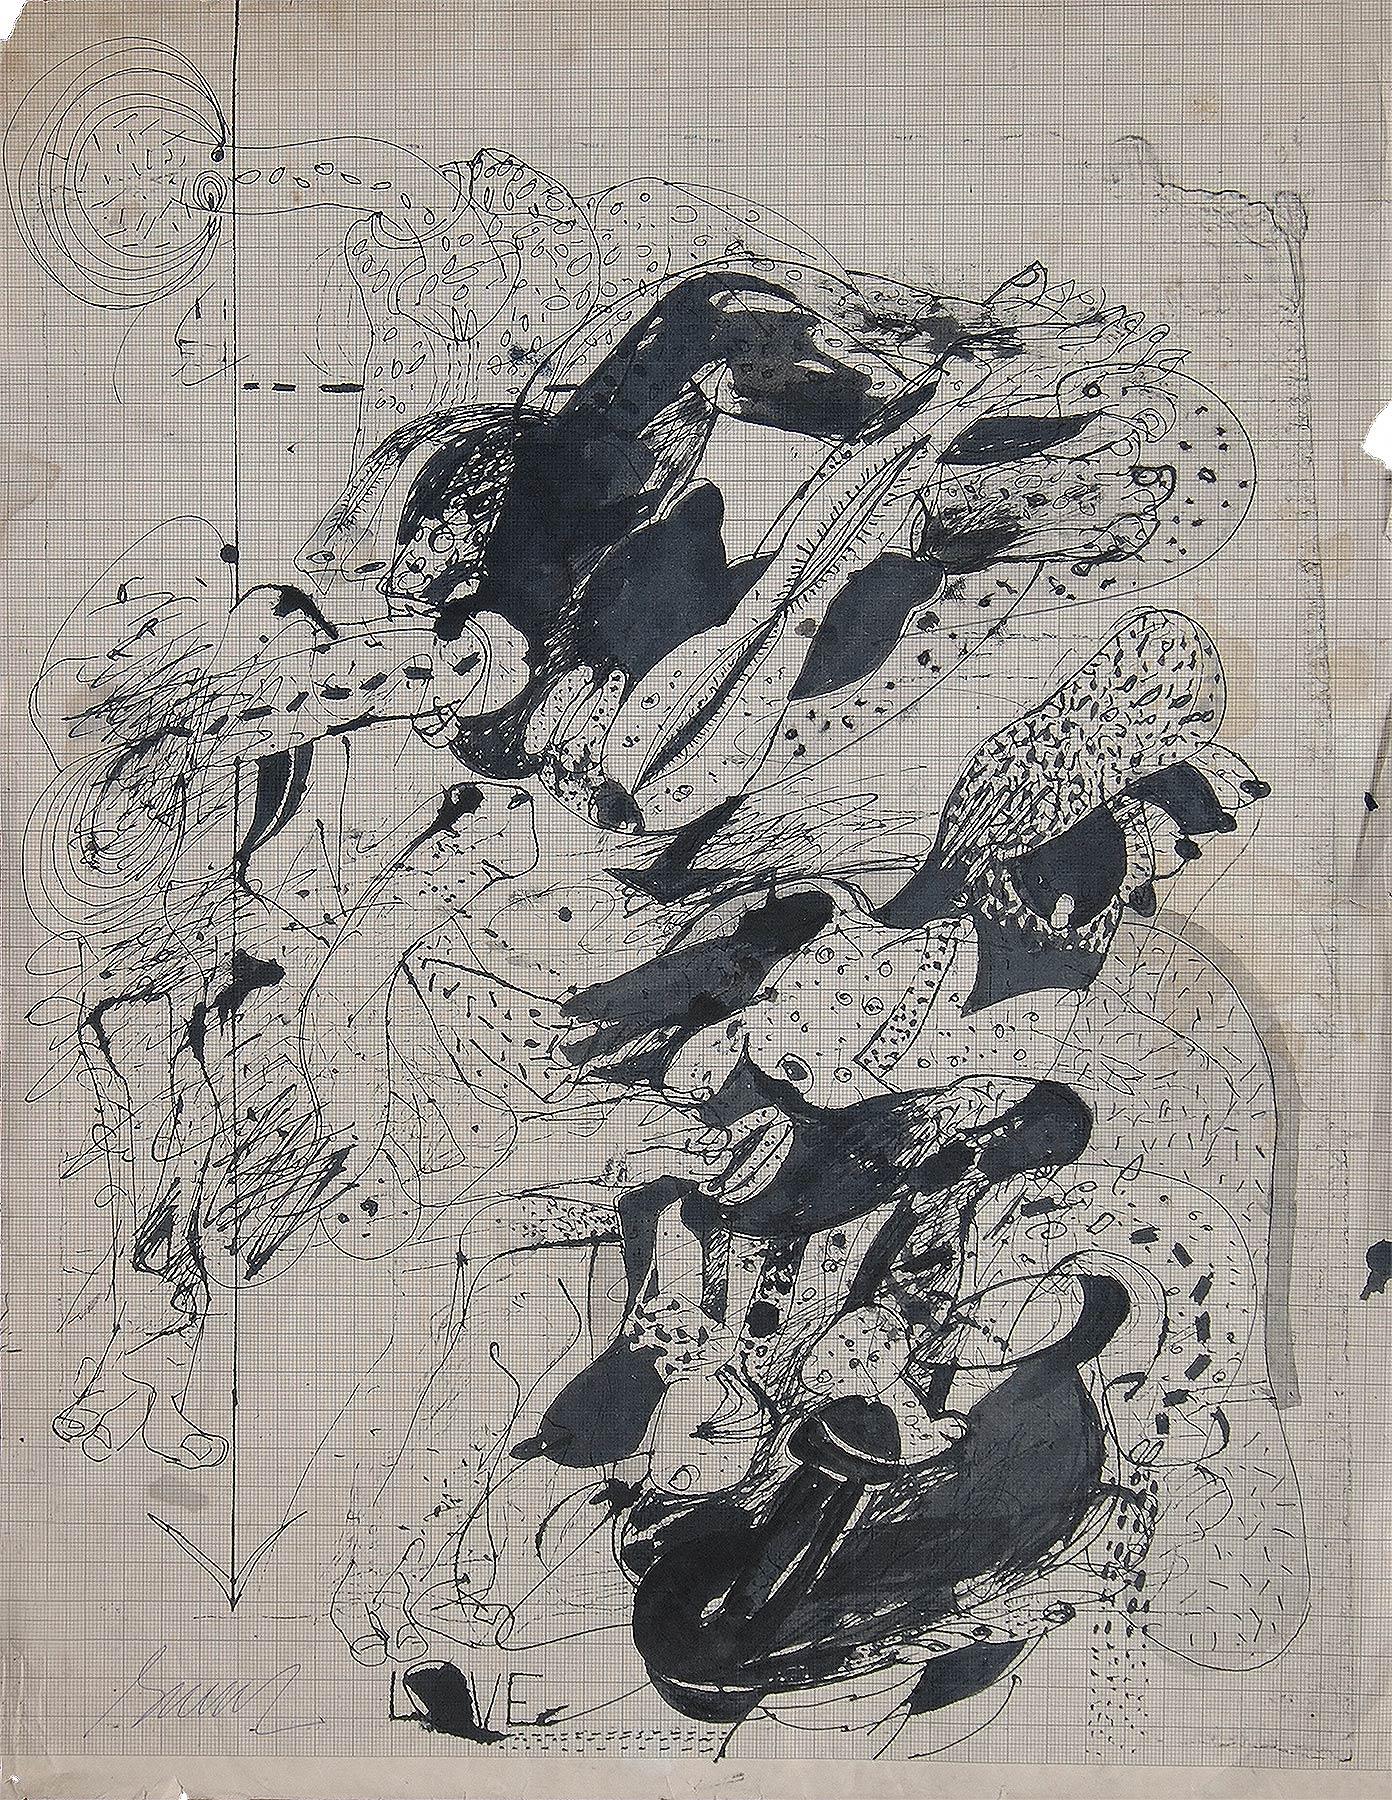 Sunil Das Abstract Painting - Jottings, Pen & Ink on Graph Paper, Black & White by Indian Artist "In Stock"